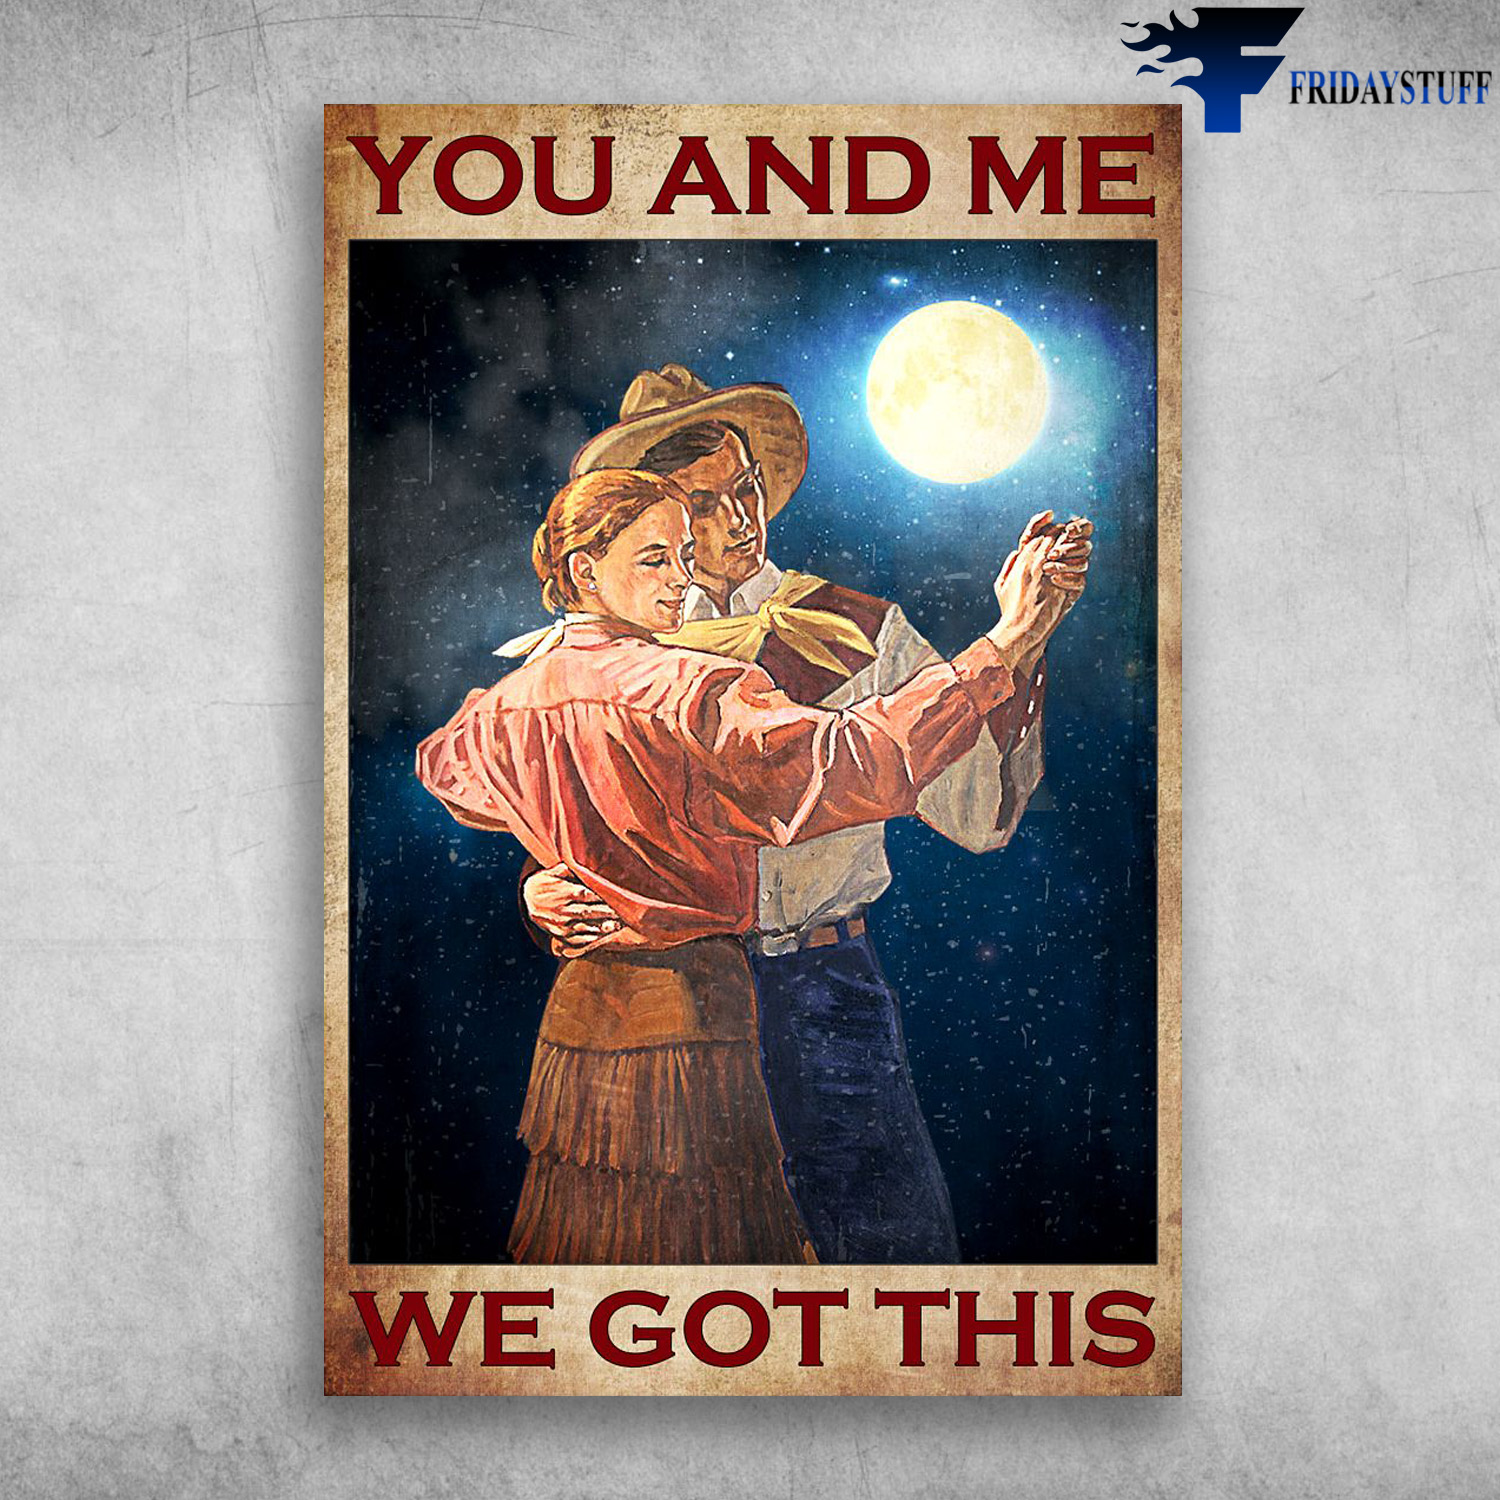 The Couple Dancing In The Moonlight - You And Me, We Got This